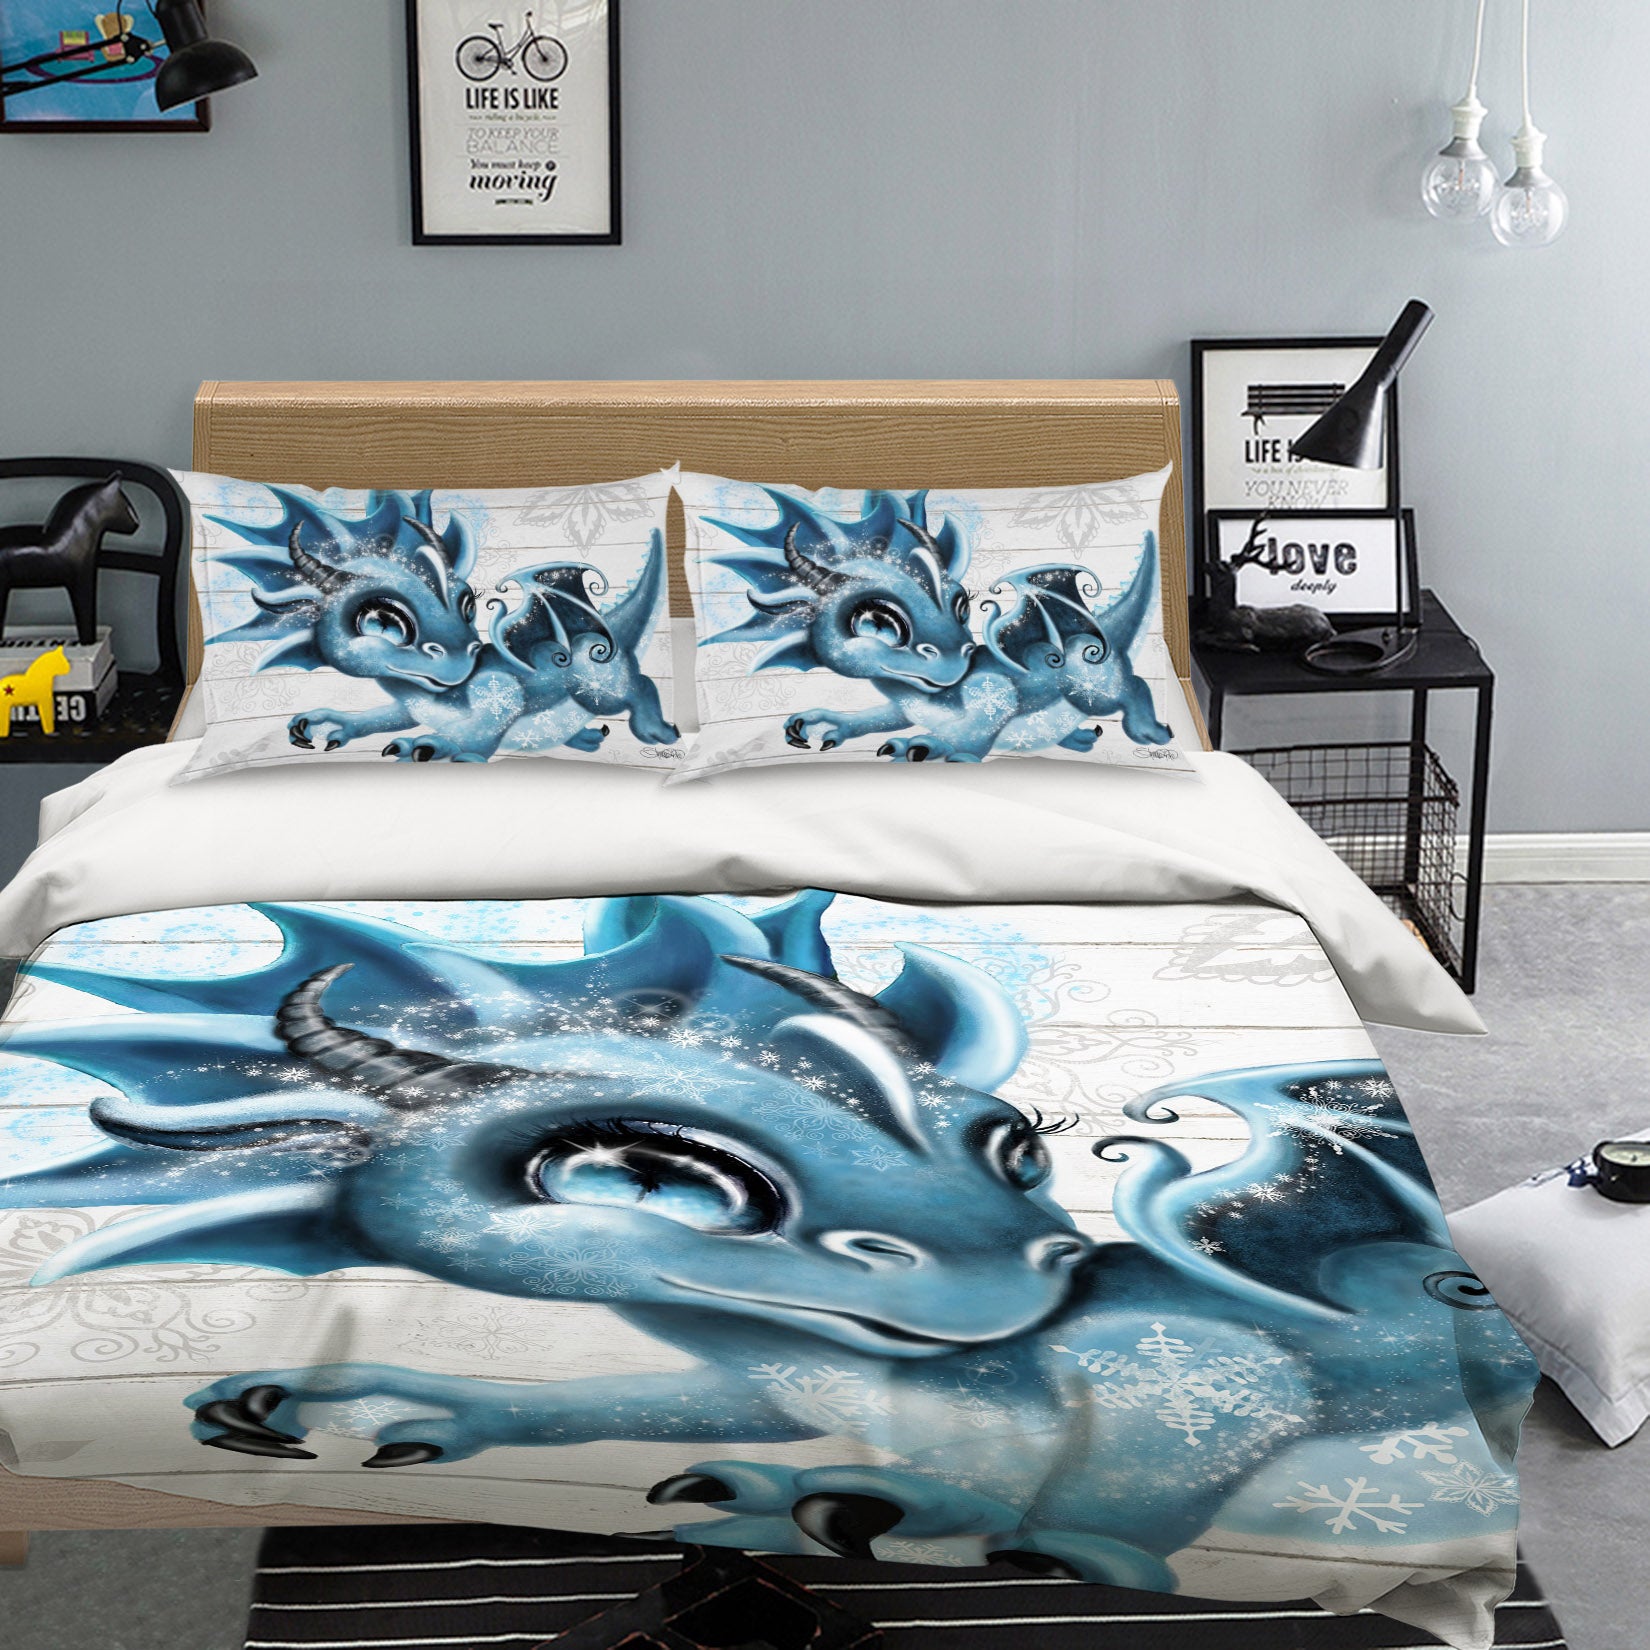 3D Snow Dragon 8627 Sheena Pike Bedding Bed Pillowcases Quilt Cover Duvet Cover